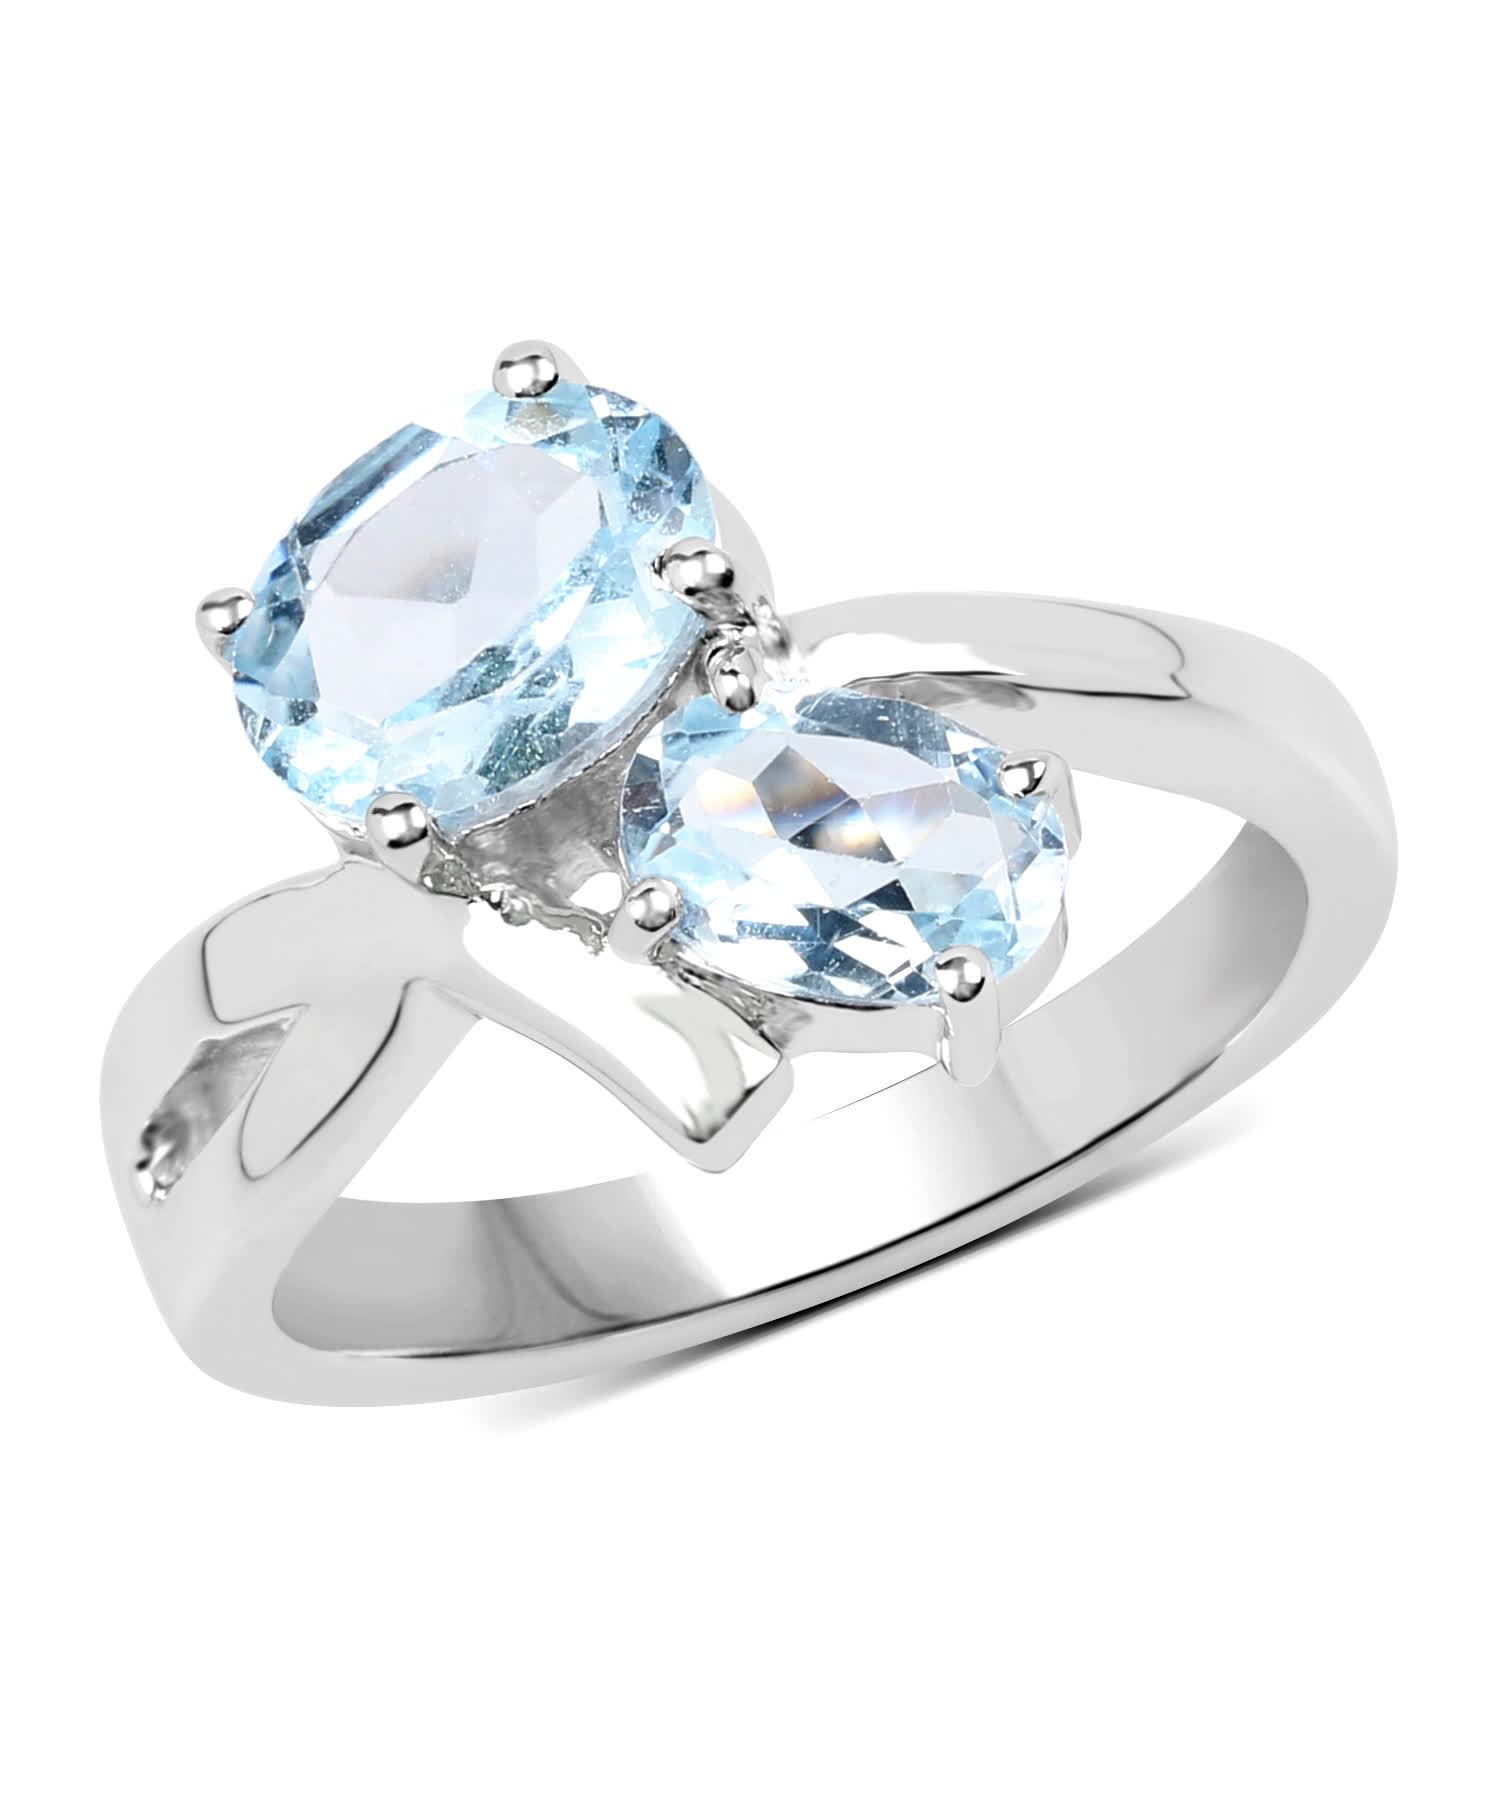 2.55ctw Natural Sky Blue Topaz Rhodium Plated 925 Sterling Silver Two-Stone Ring View 1